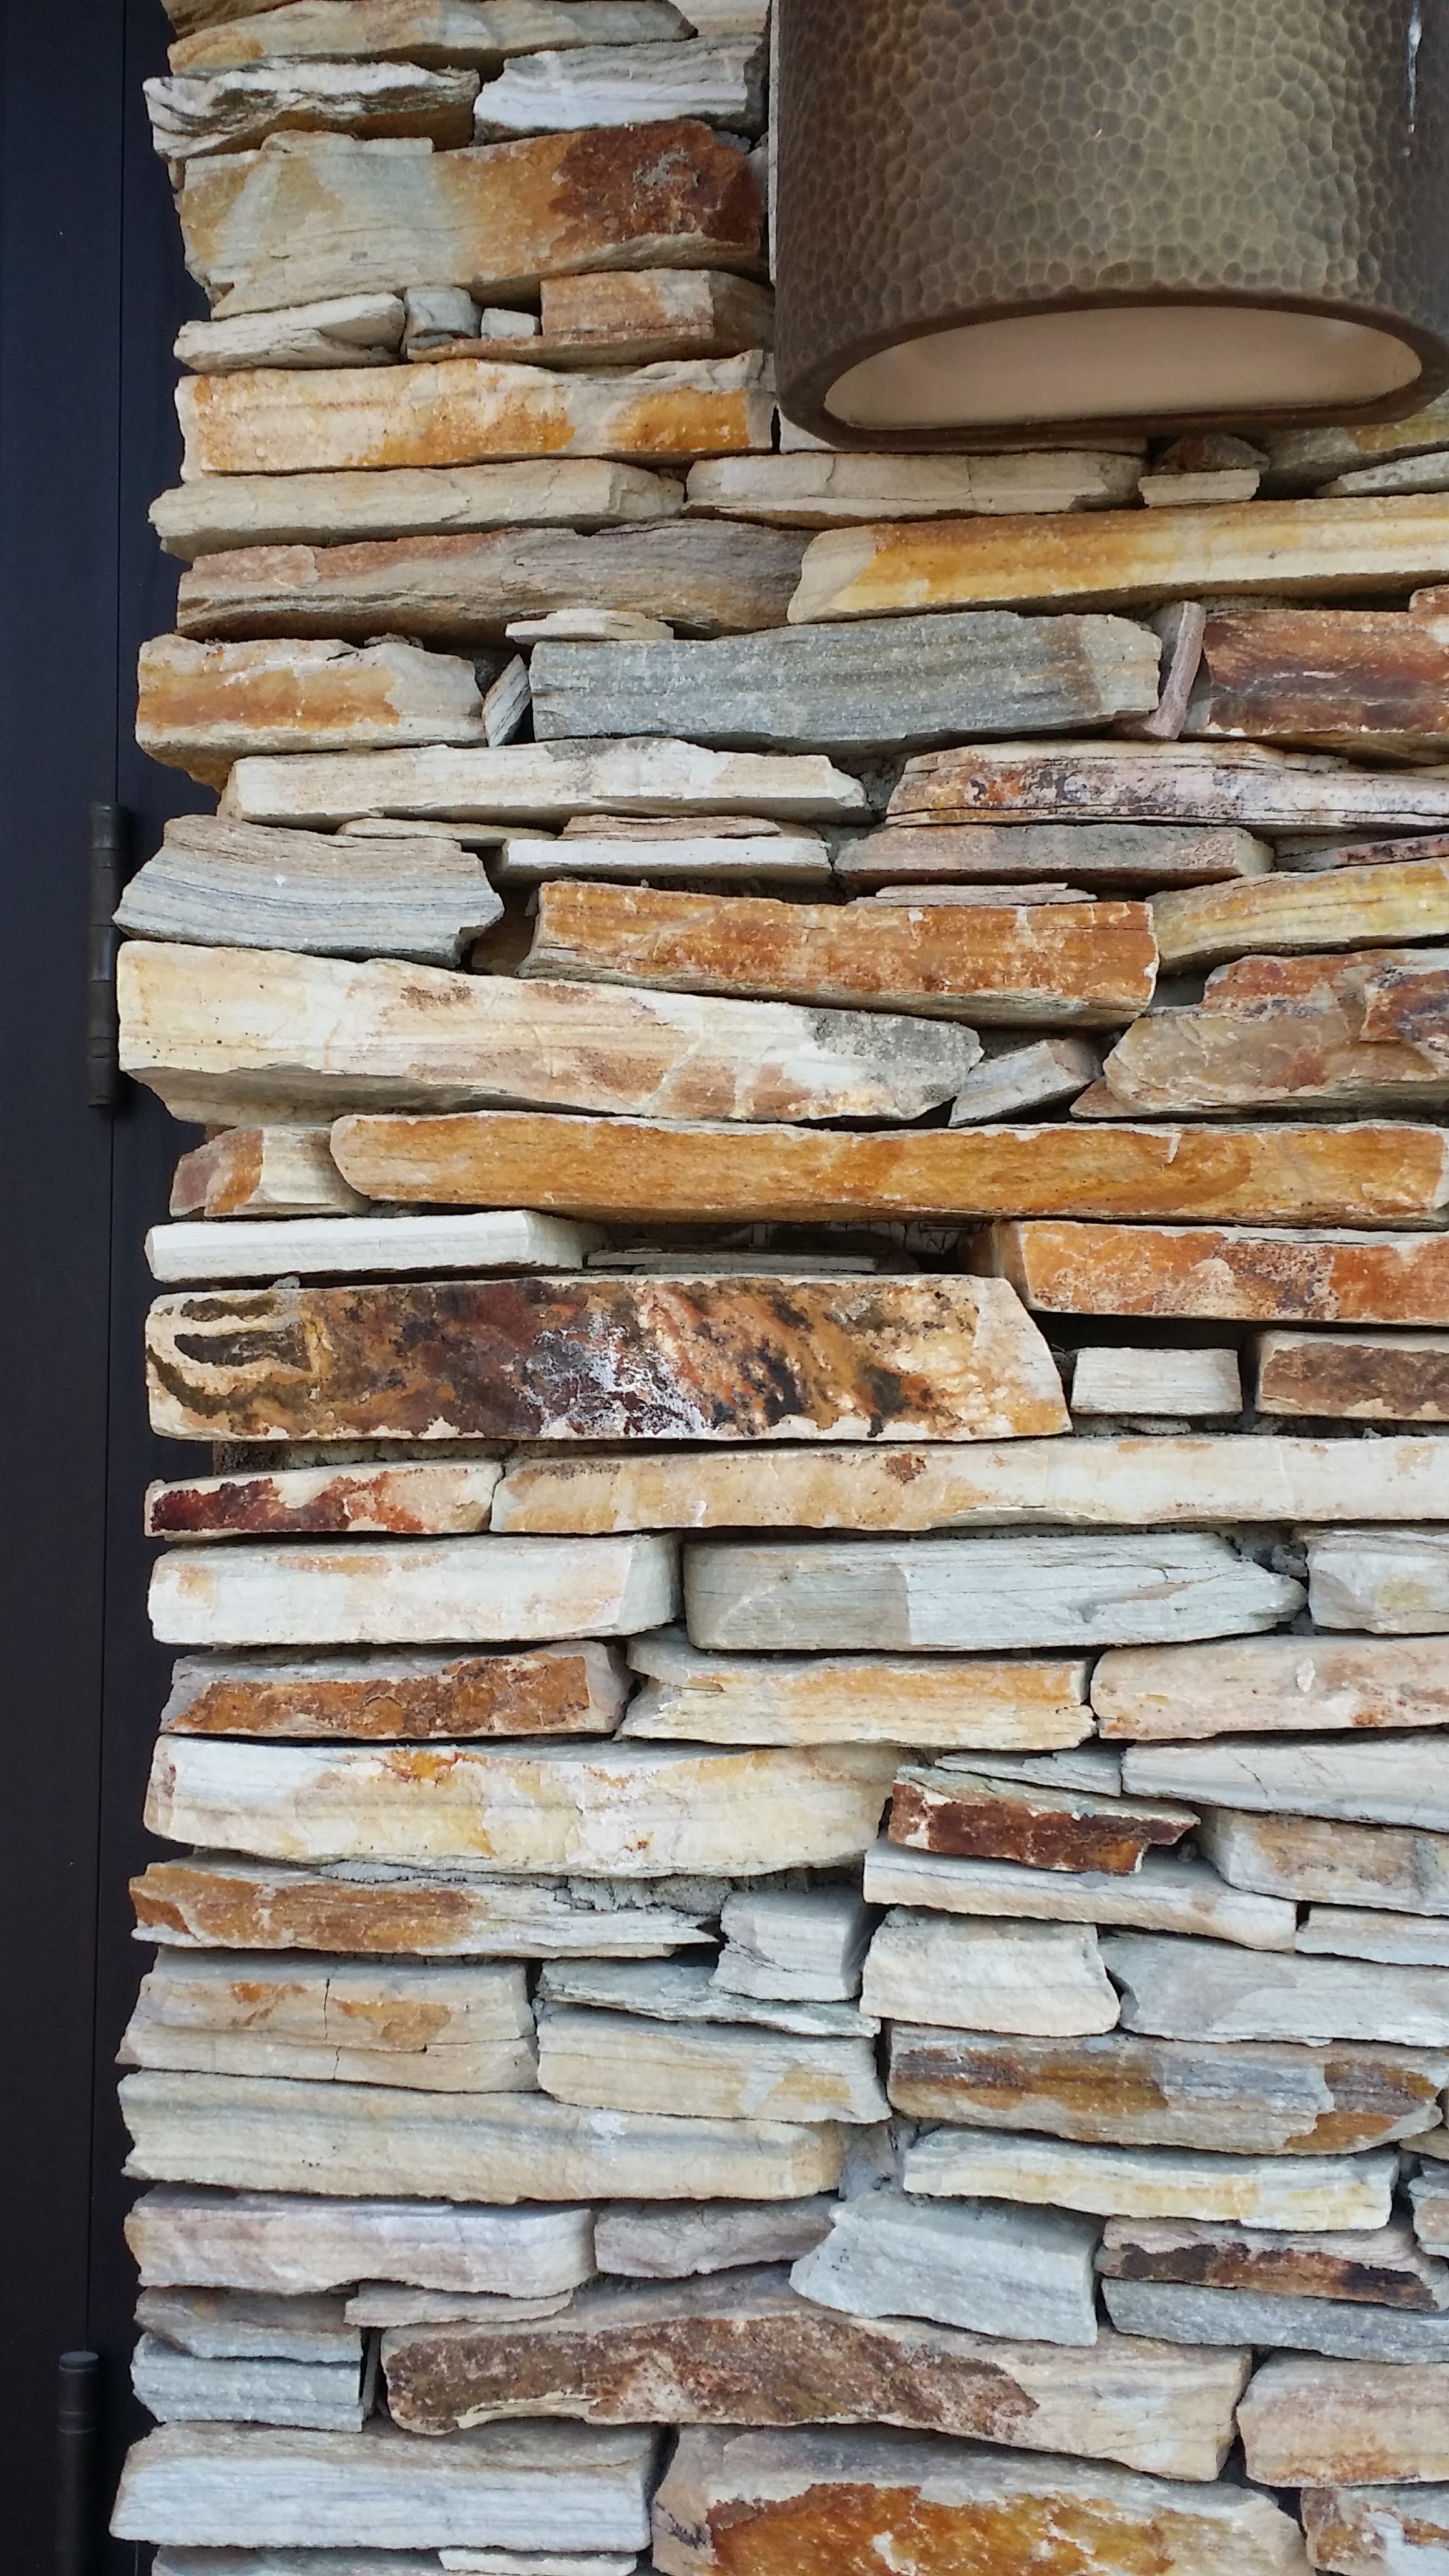 Photo of stone wall taken, owned by Gloria Faye Brown Bates/aka Granny Gee